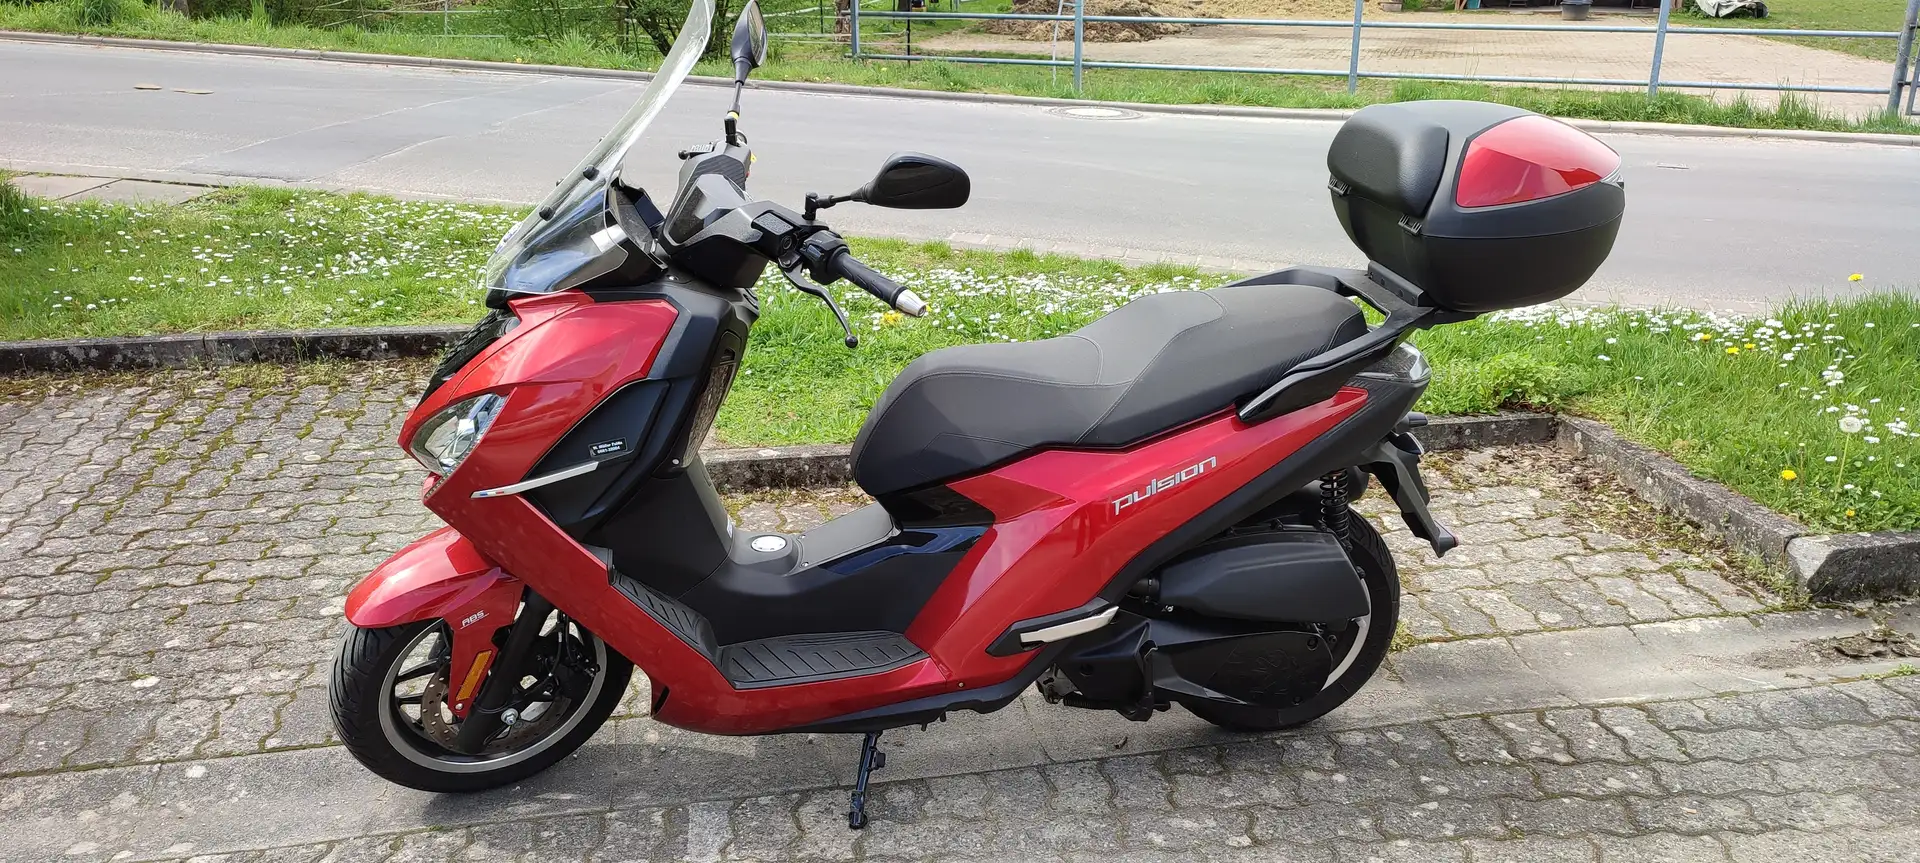 Peugeot Pulsion 125i ABS  mit Topcase Red - 2